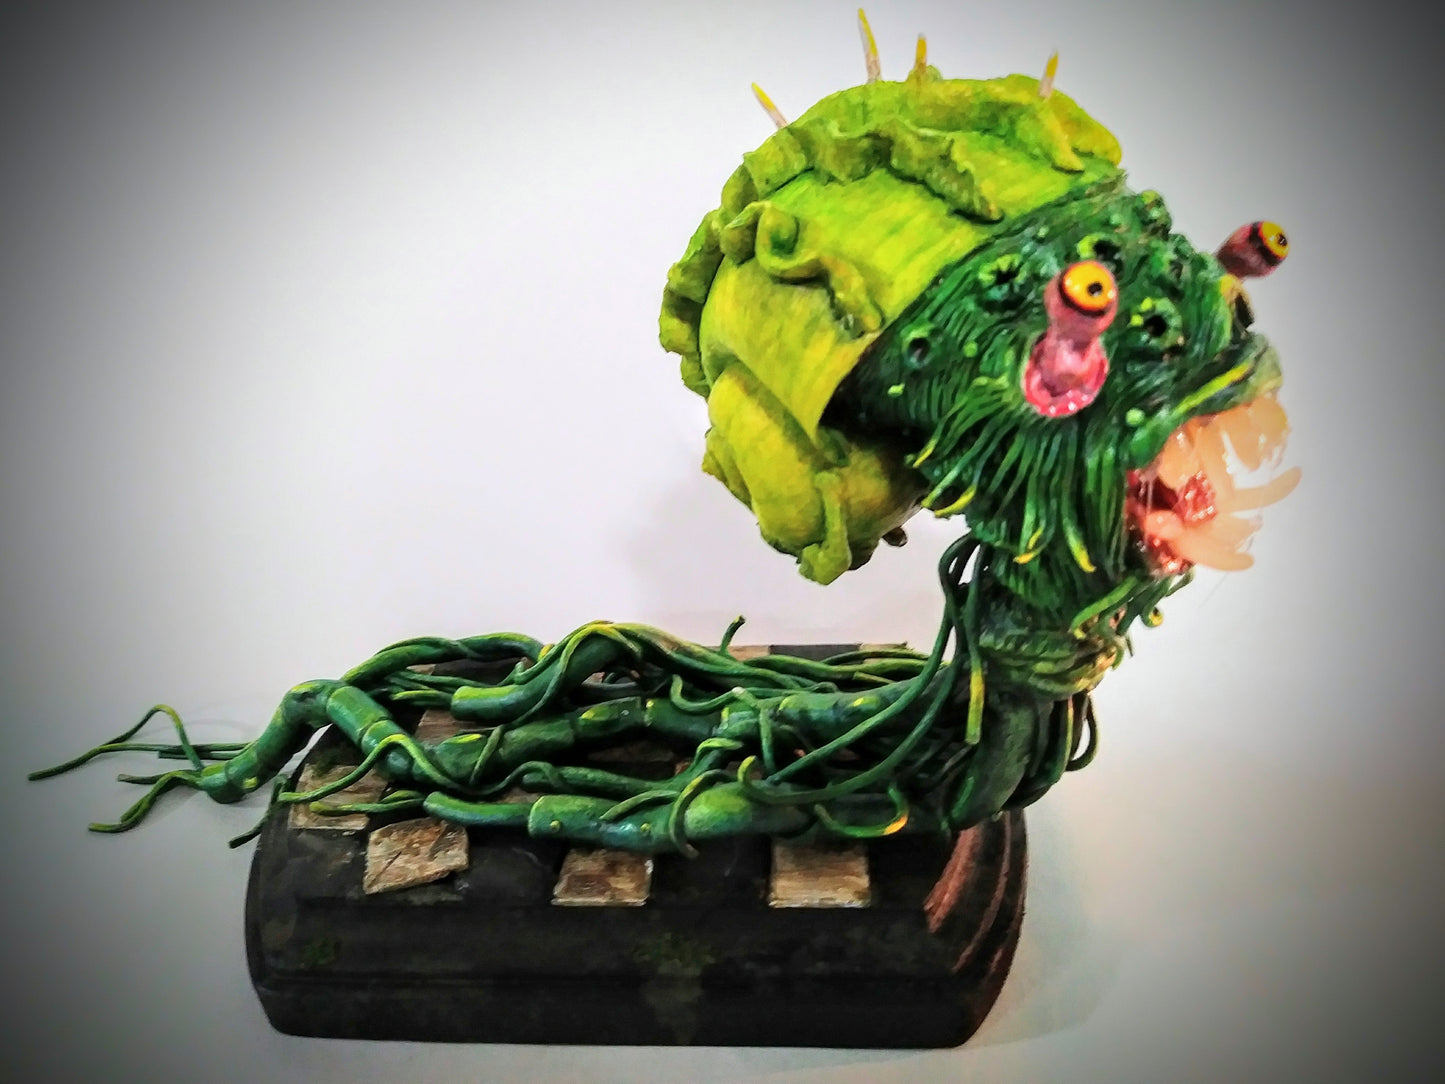 Thurs. September 28, 2023 Fantasy Clay Diorama Workshop 7 - 9 PM (ages 14 - up)